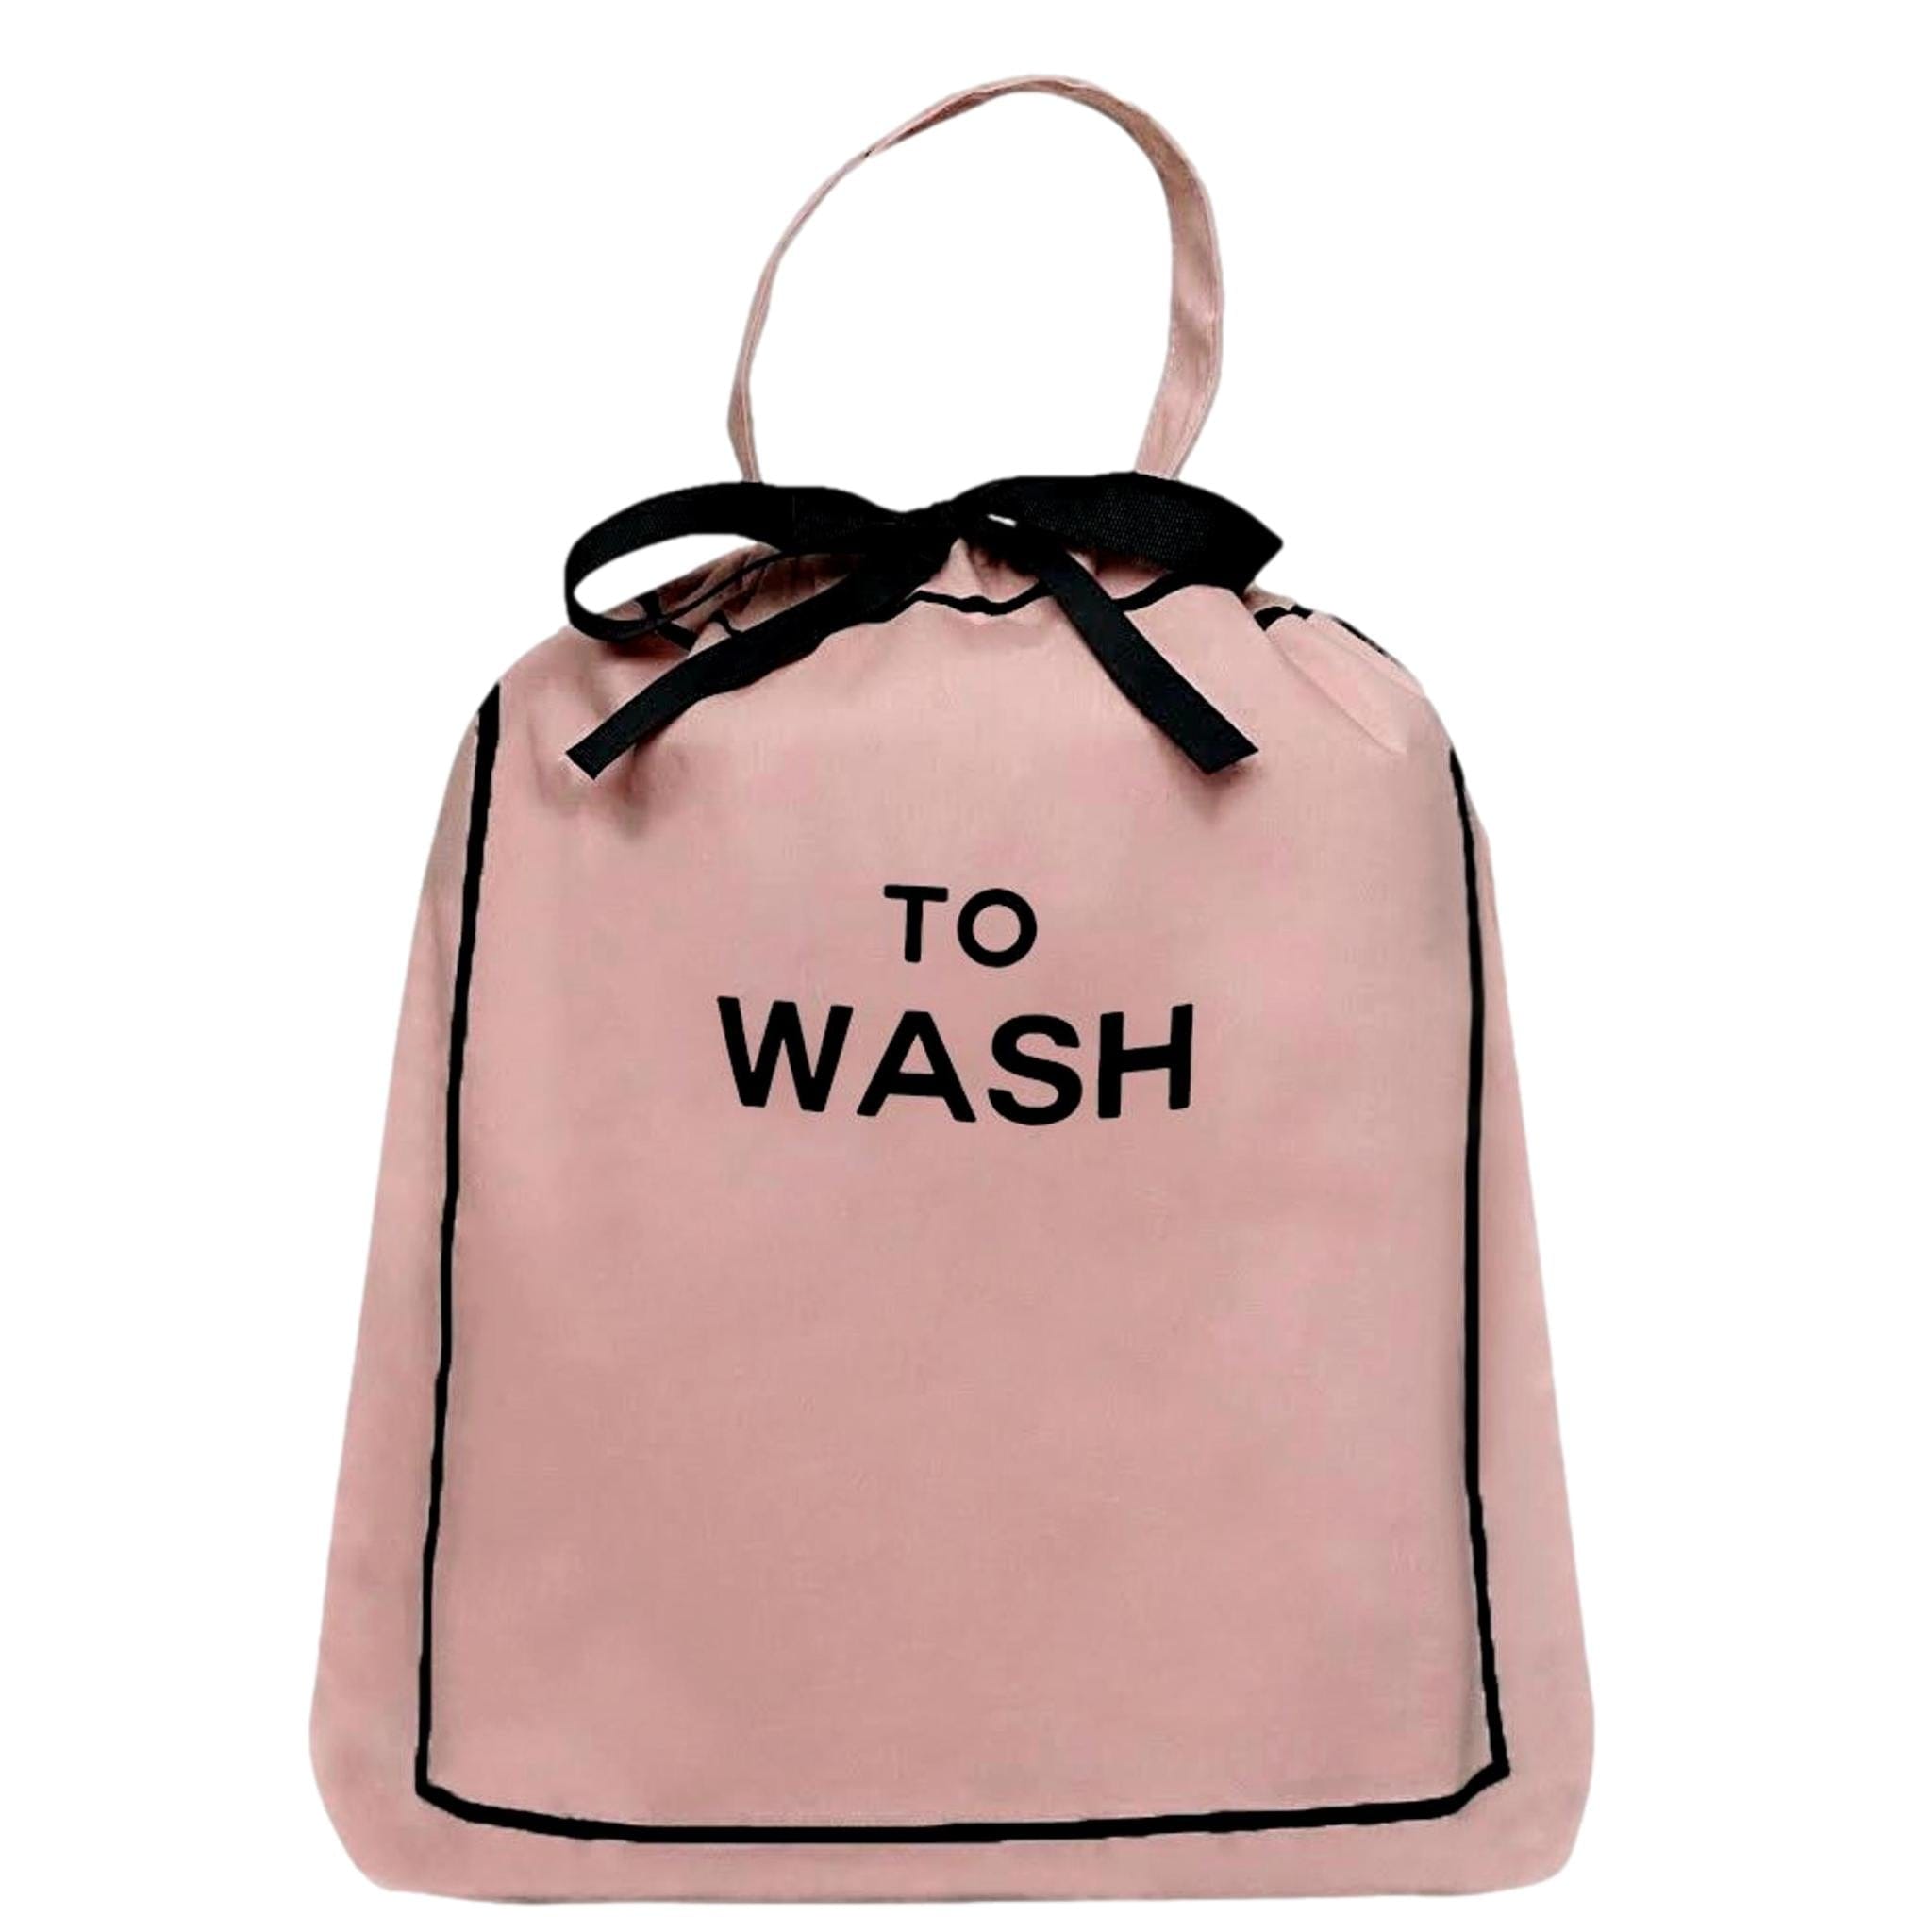 To Wash Laundry Bag